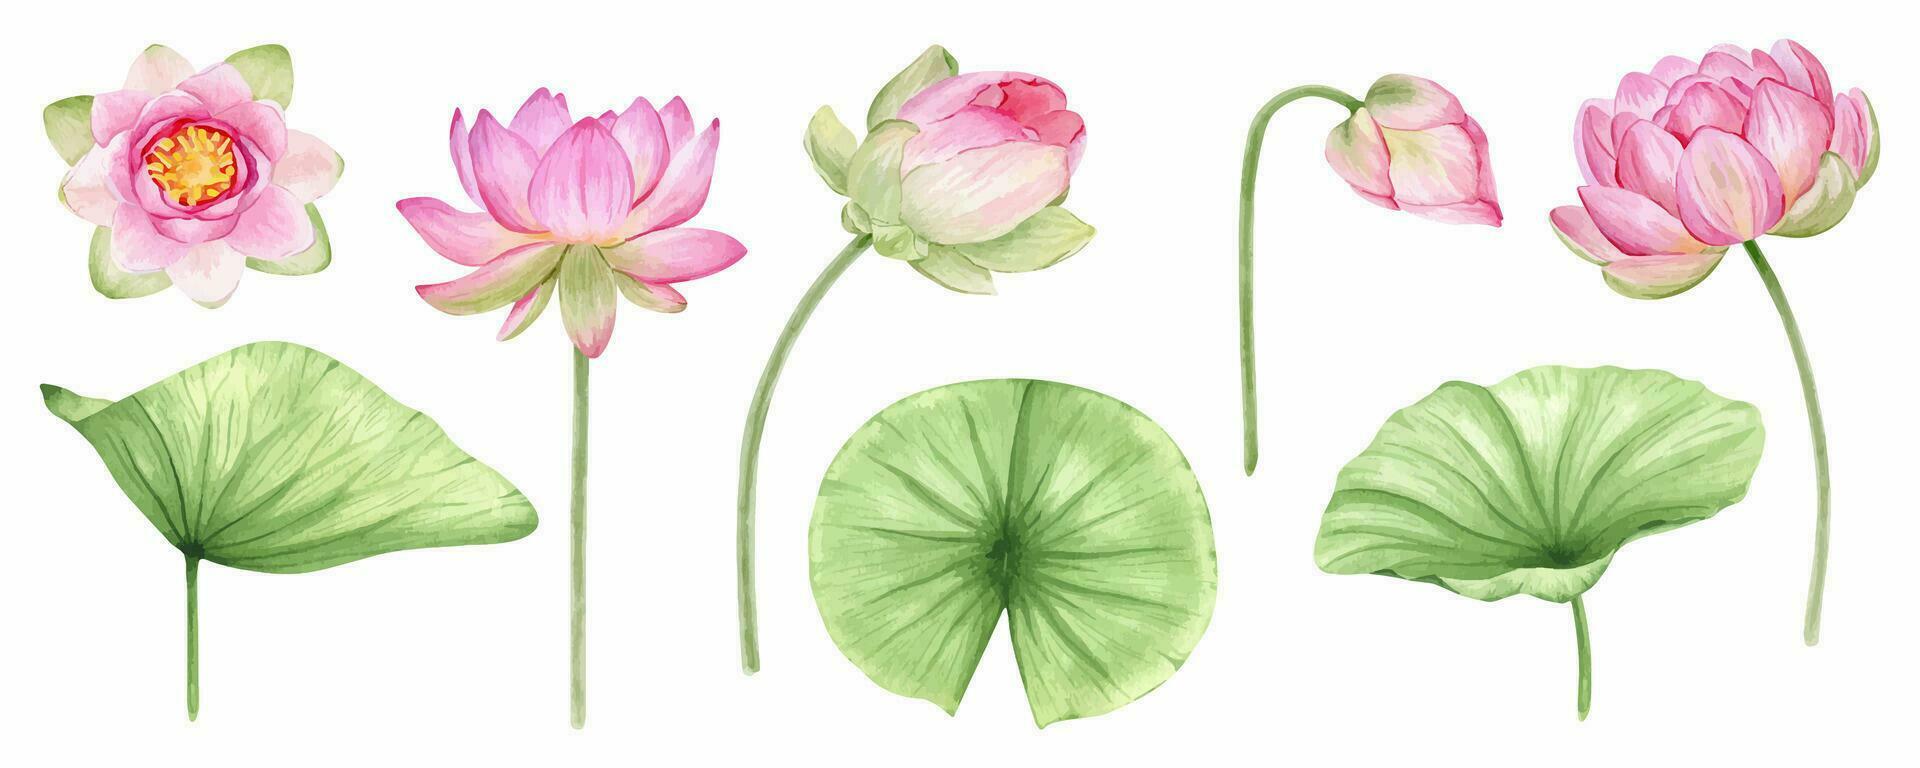 A set of flowers and leaves of pink lotuses. Watercolor illustration. isolated. Chinese water lily. An element for the design of invitations, movie posters, fabrics and other items. vector